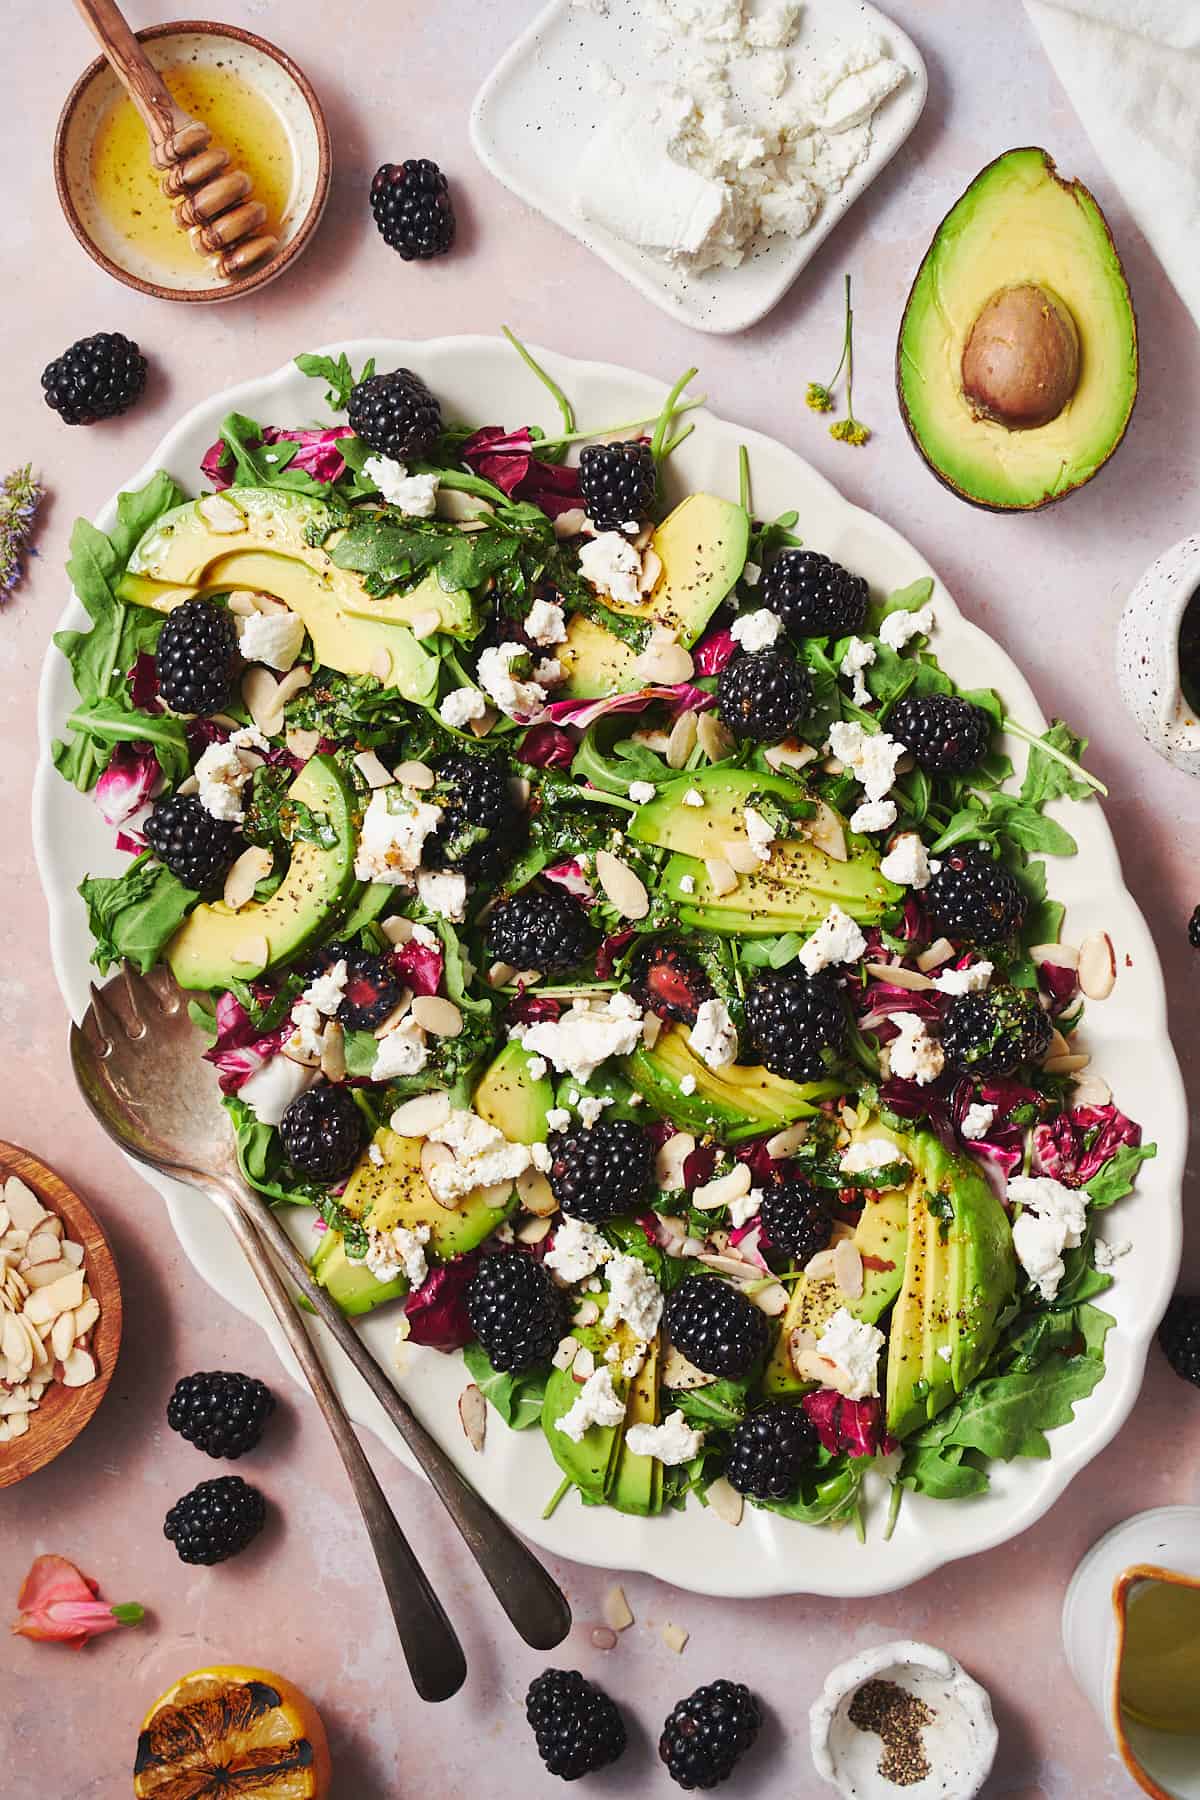 ruffled white salad plate with a blackberry and avocado salad, surrounded by lemons, blackberries, and crunchy almonds.